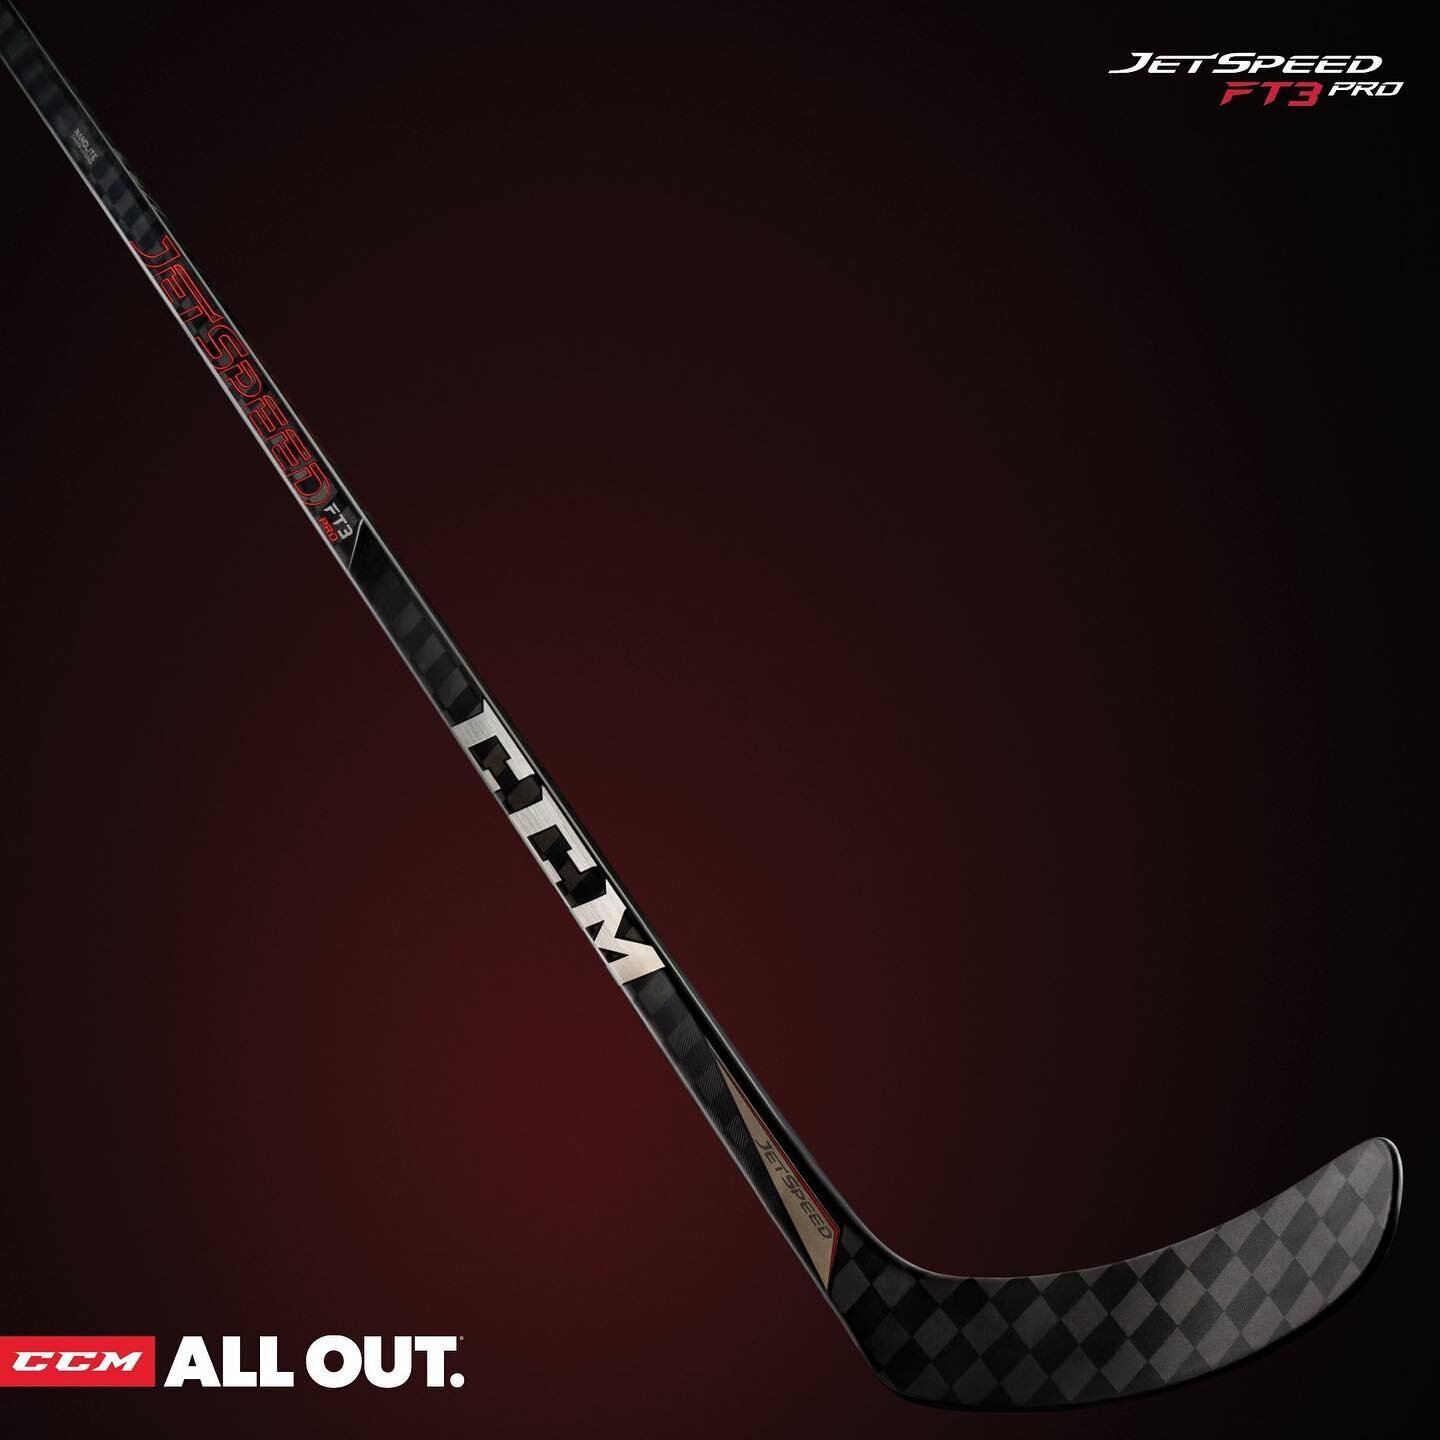 The next generation of JetSpeed has arrived! Score from anywhere with the new NanoliteCarbon Layering technology and a hybrid kick point loved by players across the world. Oh, and did we mention the #JetSpeedFT3Pro was perfected in the CCM Performanc